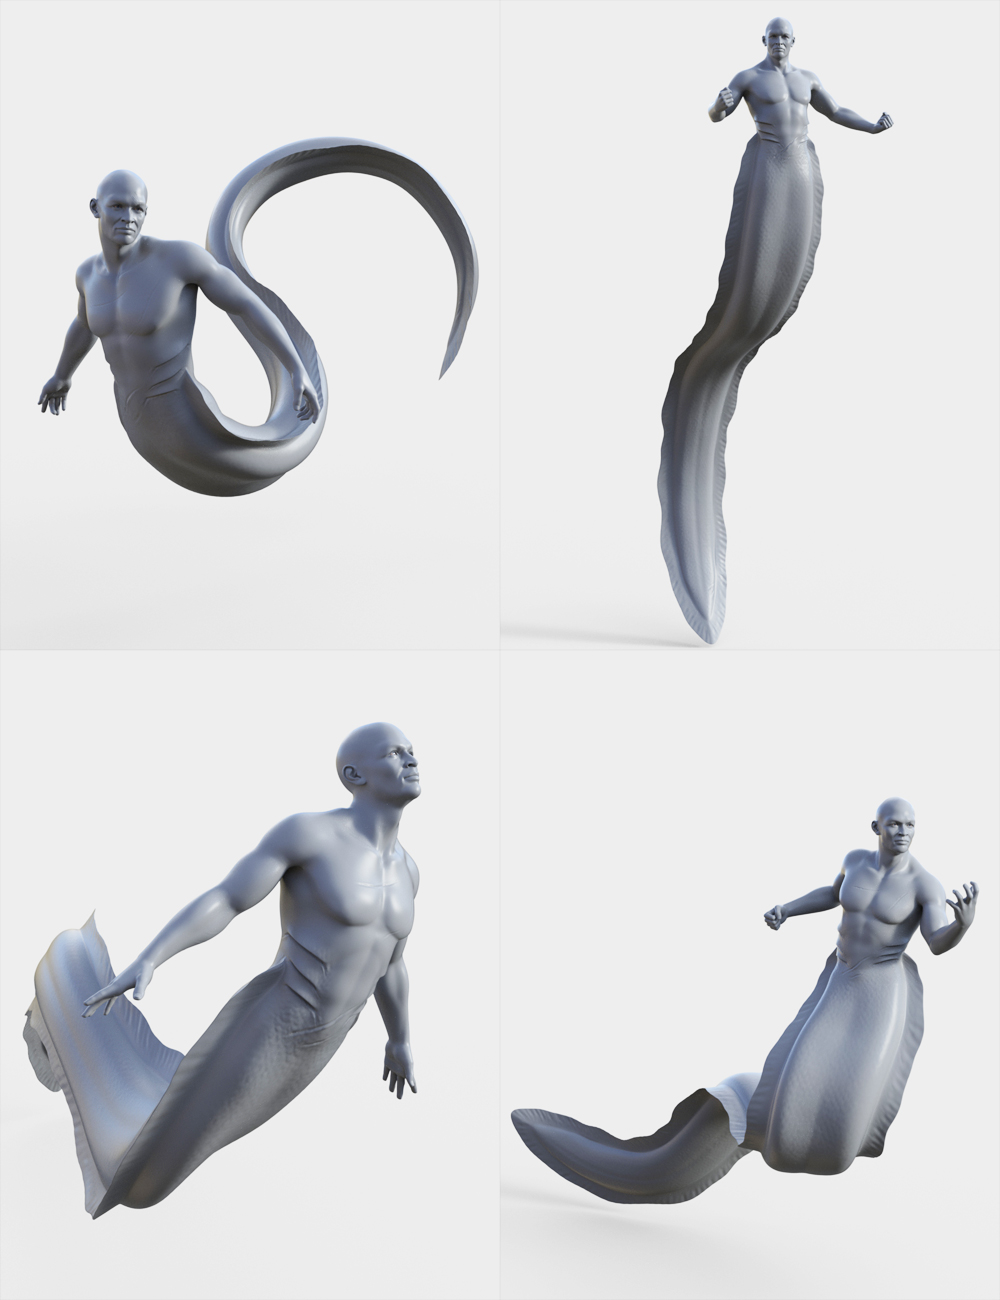 Waves of the Deep Poses and Props for Genesis 8.1 by: Muscleman, 3D Models by Daz 3D